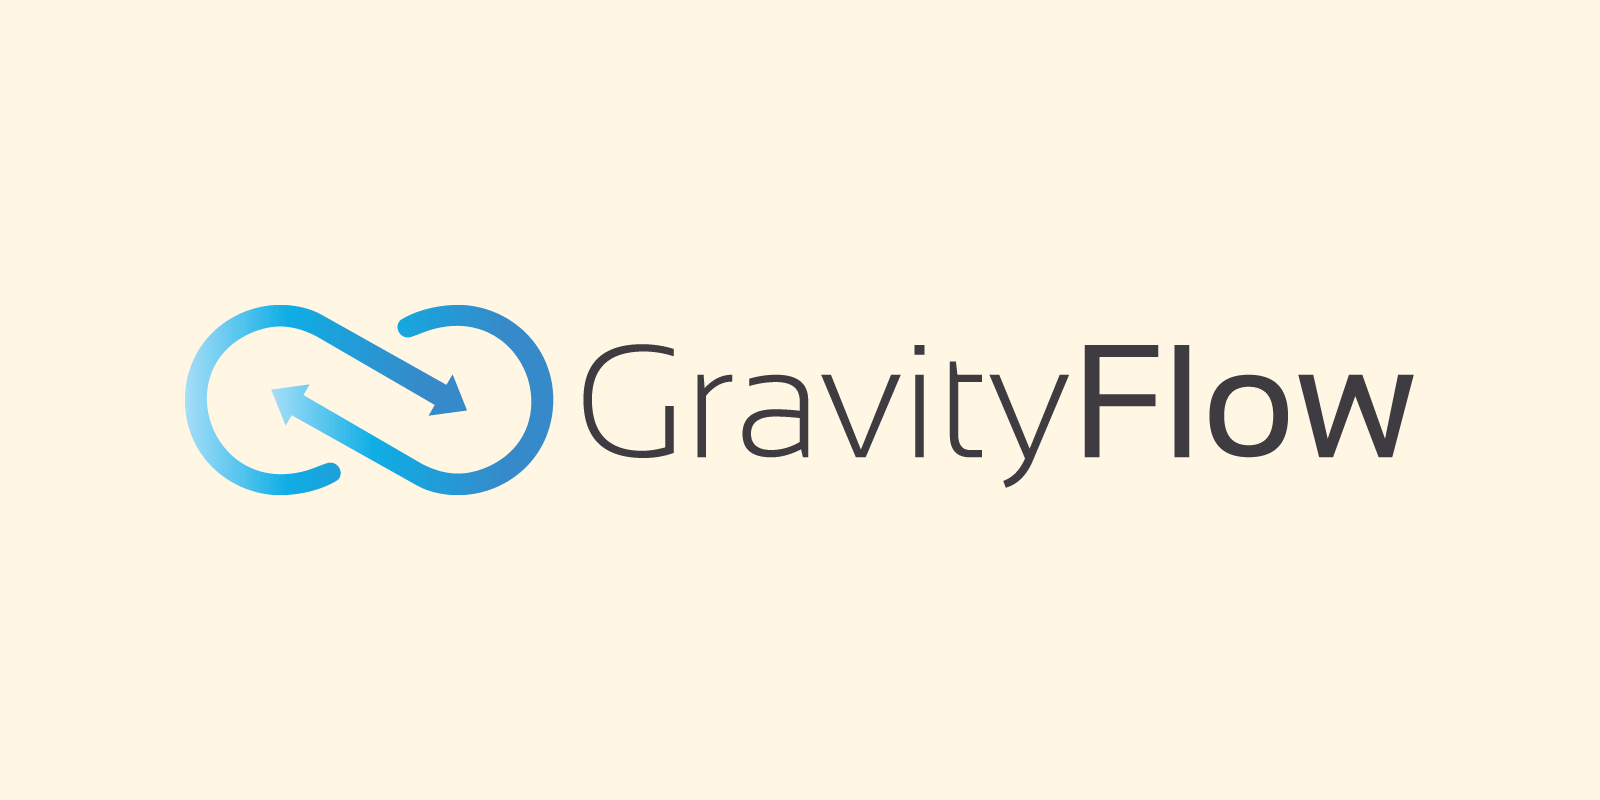 Gravity Flow makes custom form administrative workflows simple